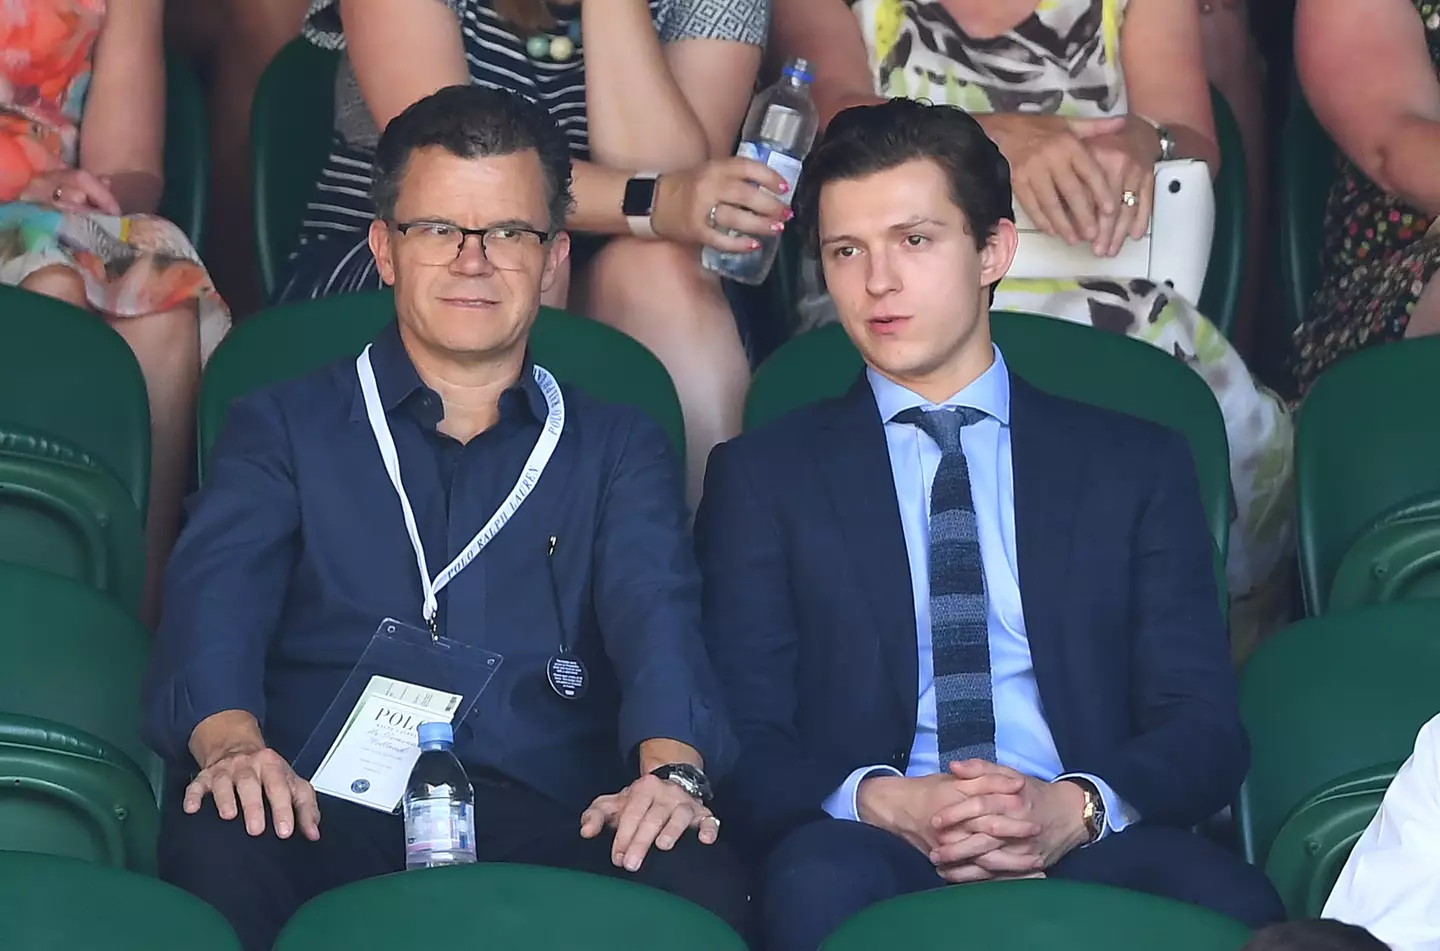 Fans have been left baffled after realizing who Tom Holland's dad is.